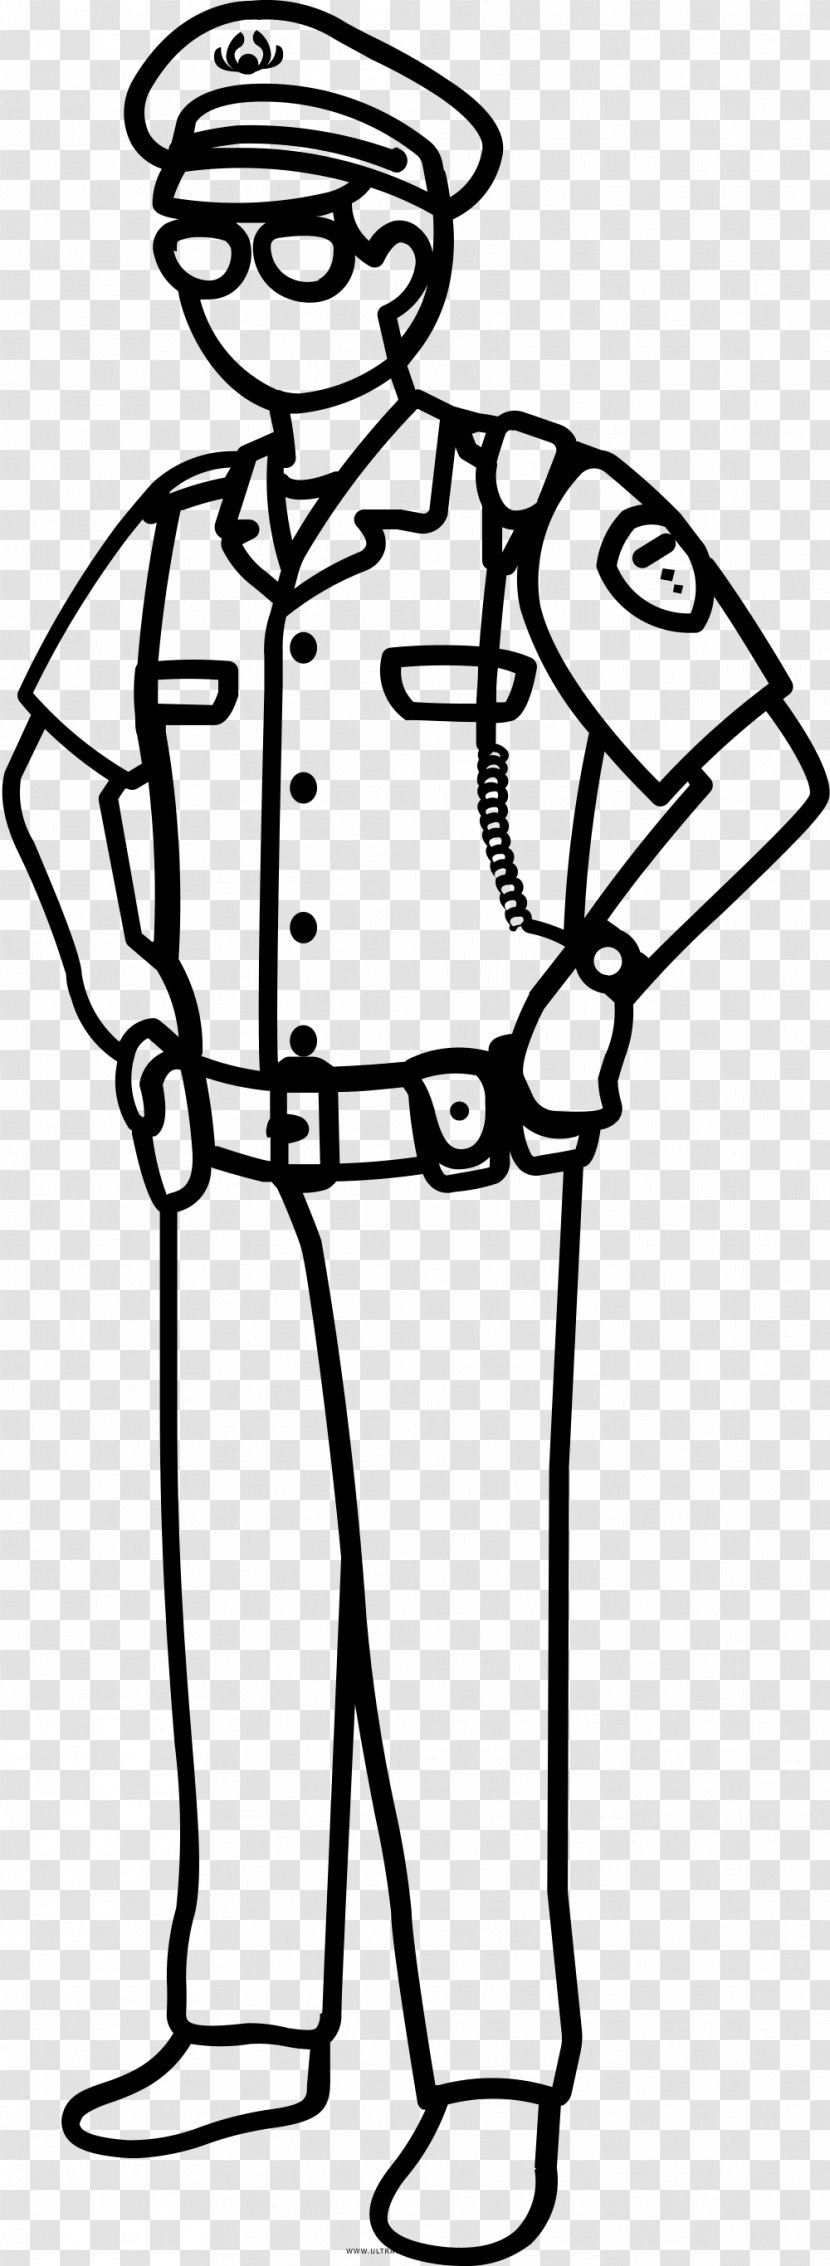 Drawing Police Coloring Book Line Art Ausmalbild - Monochrome Photography Transparent PNG